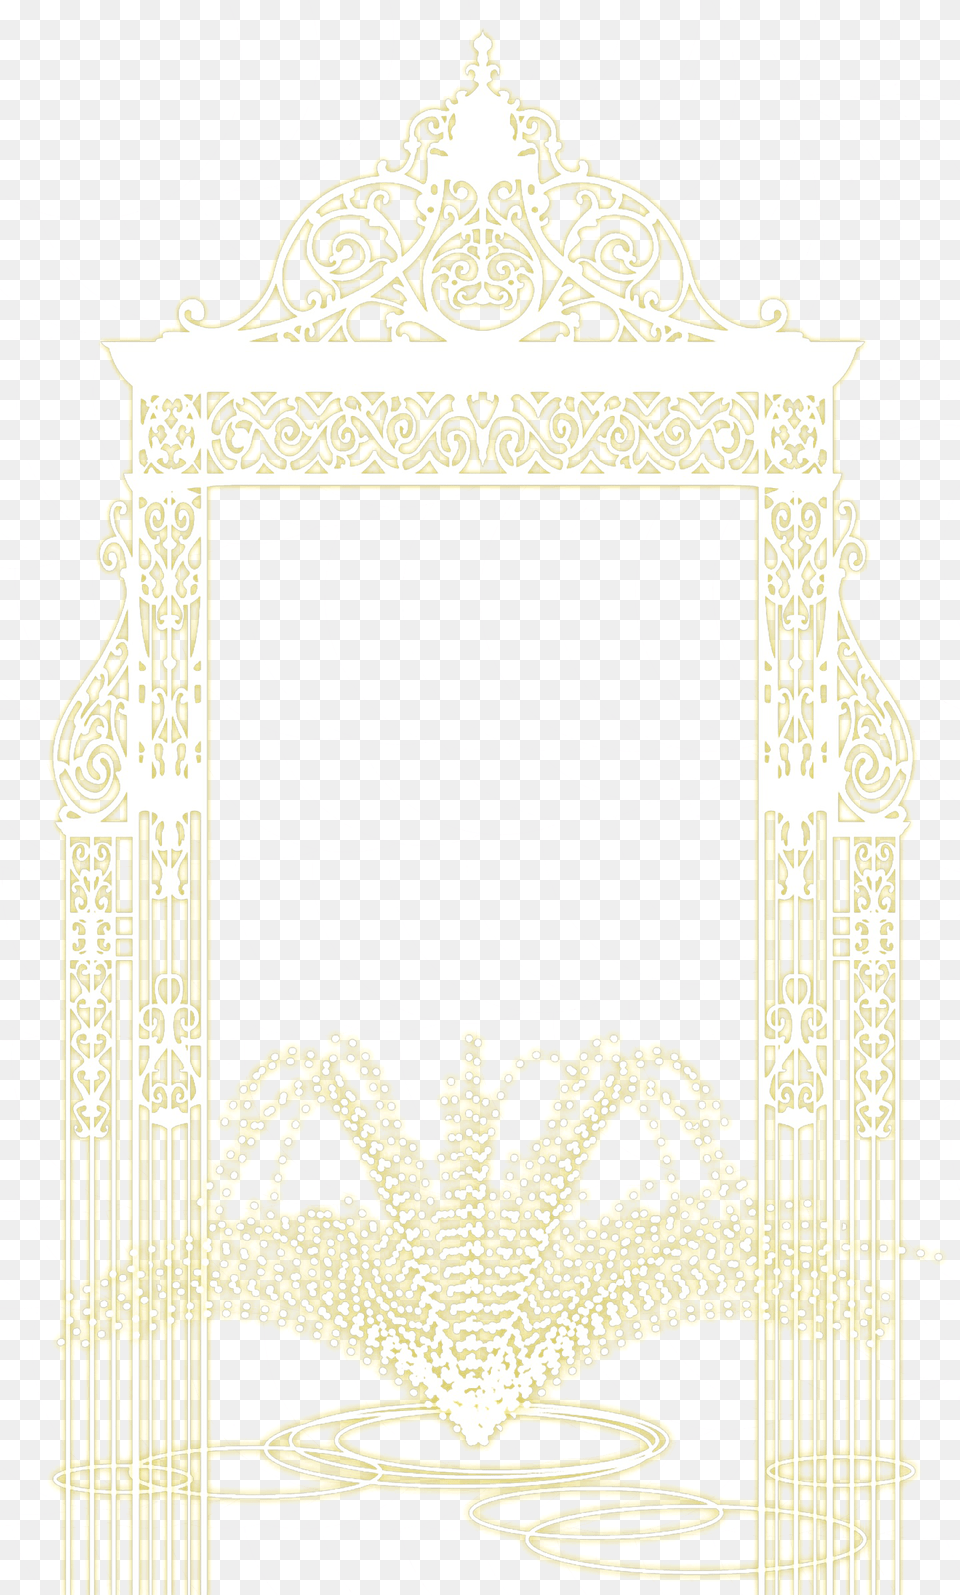 Snapchat Geofilter For The Untermyer Fountaingarden Architecture Free Png Download